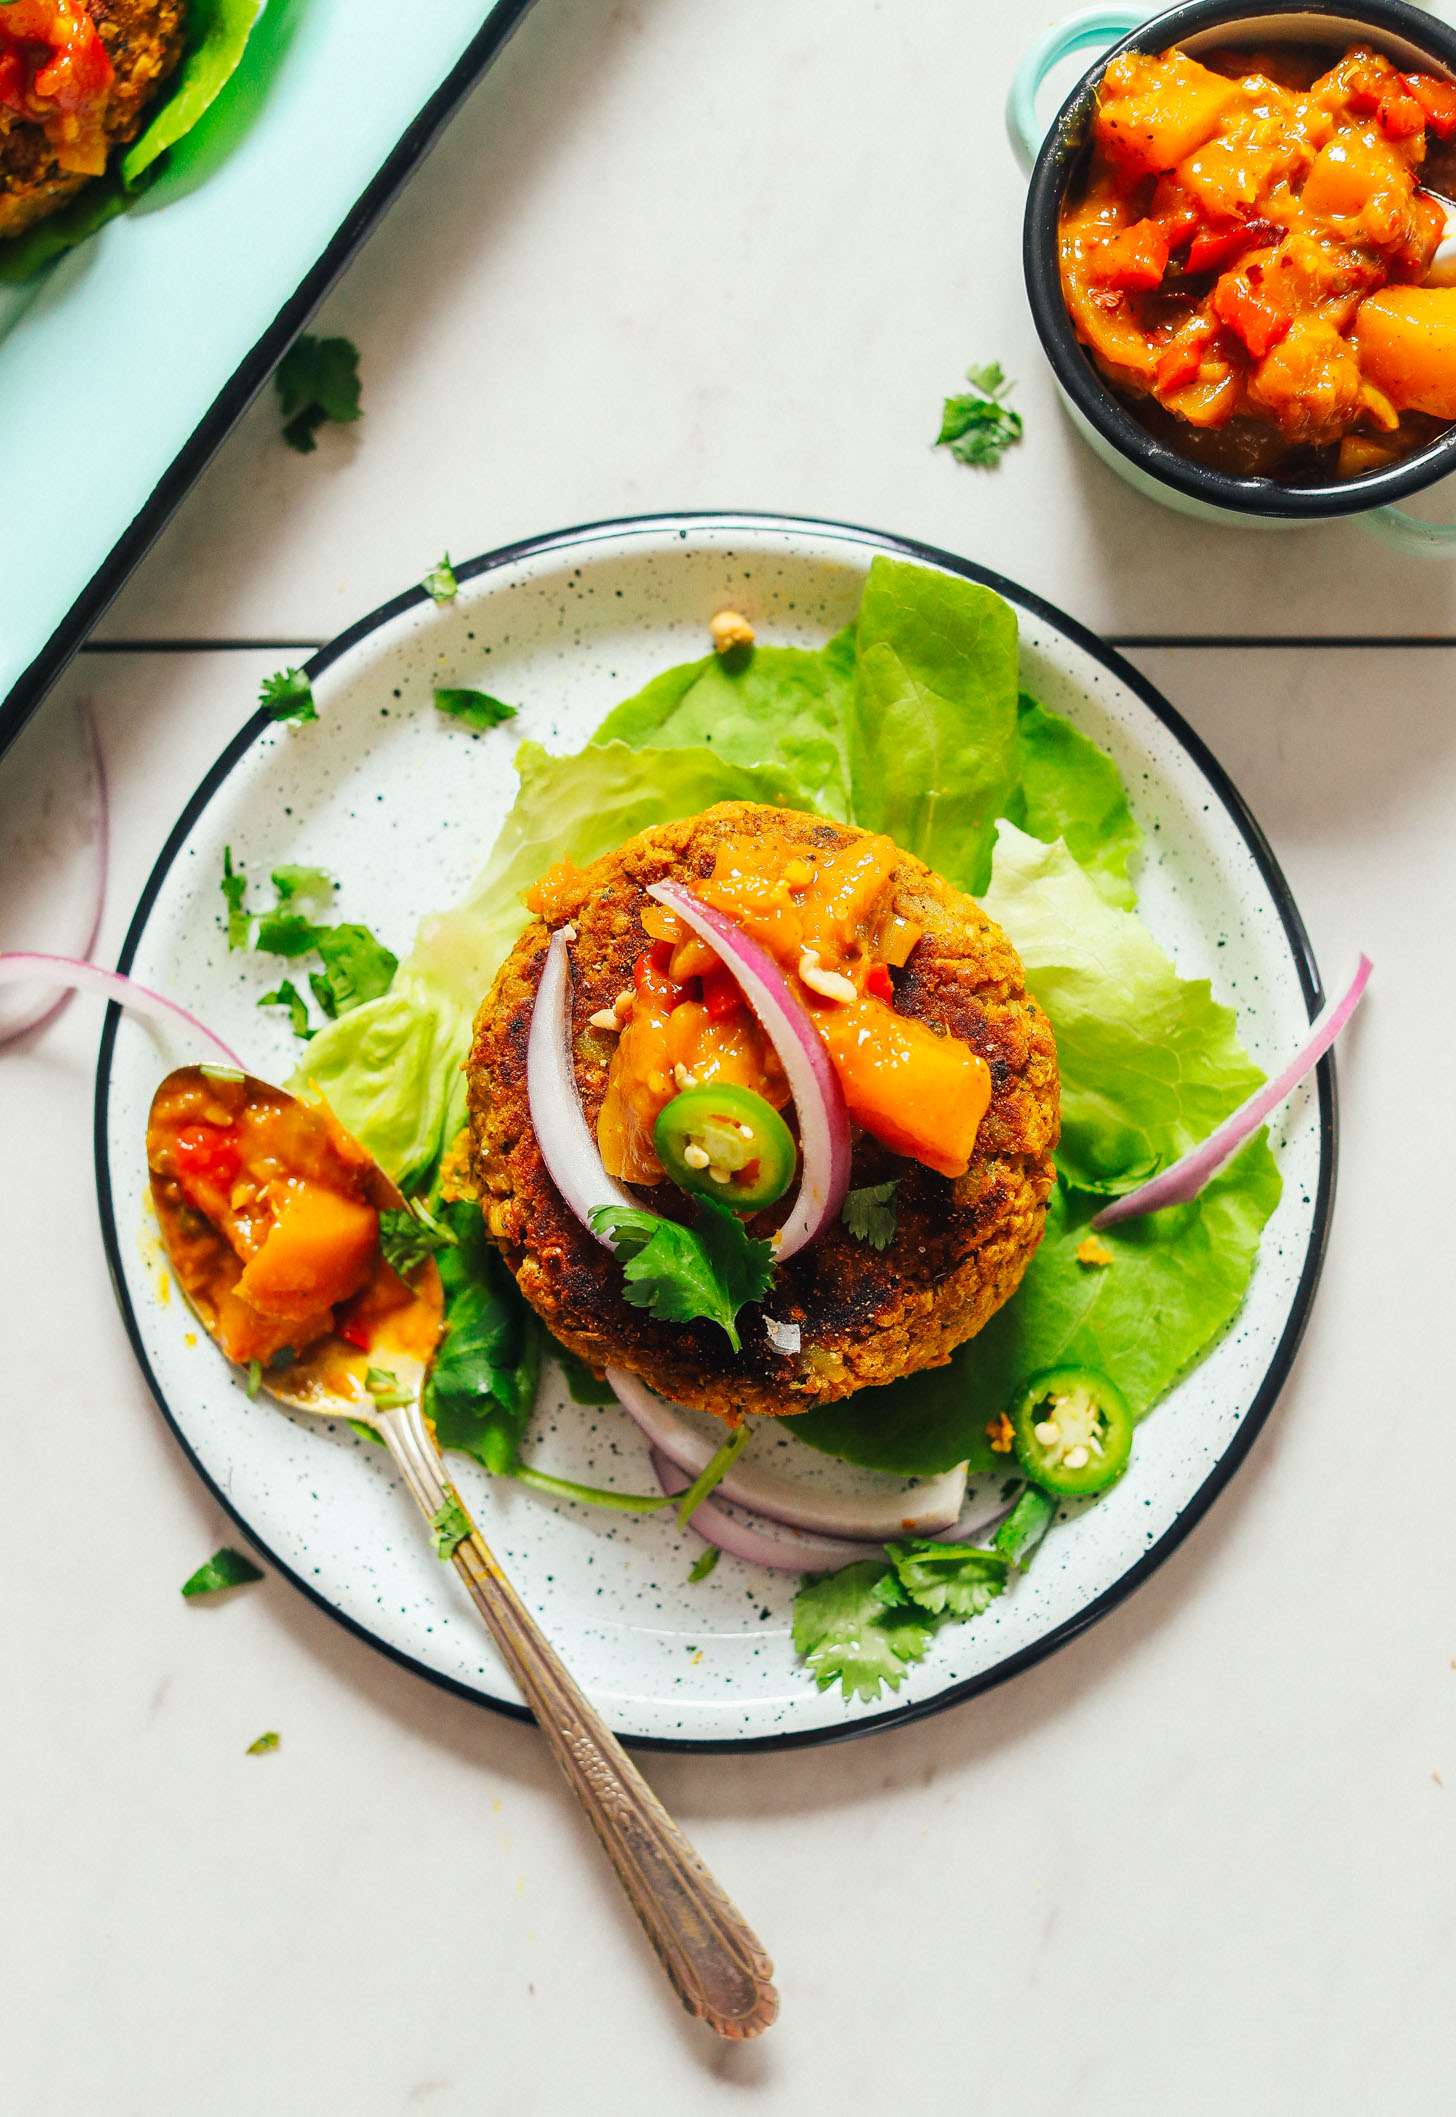 Butter lettuce leaf topped with a Curried Chickpea Burger, mango chutney, red onion, and jalapeno